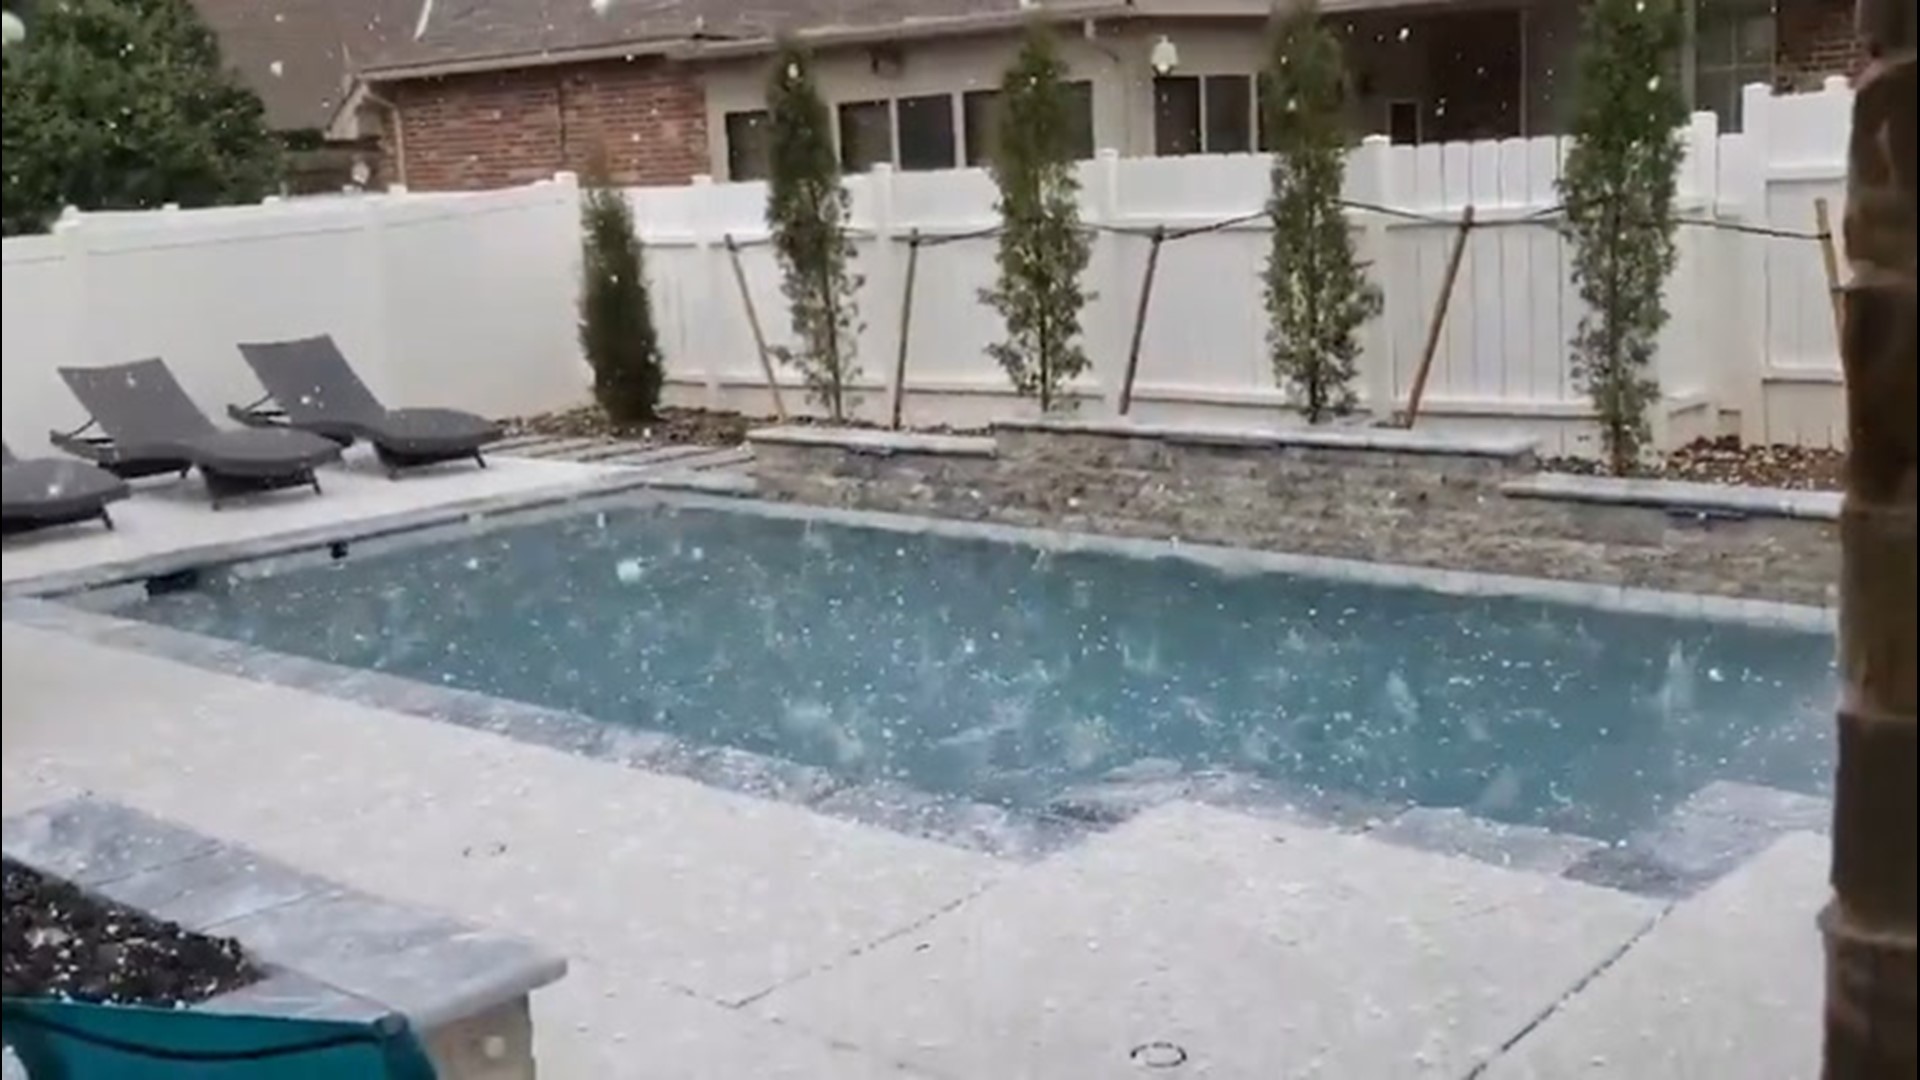 Severe storms dumped hail on Edmond, Oklahoma, on March 27. The hail pelted this backyard and pool.